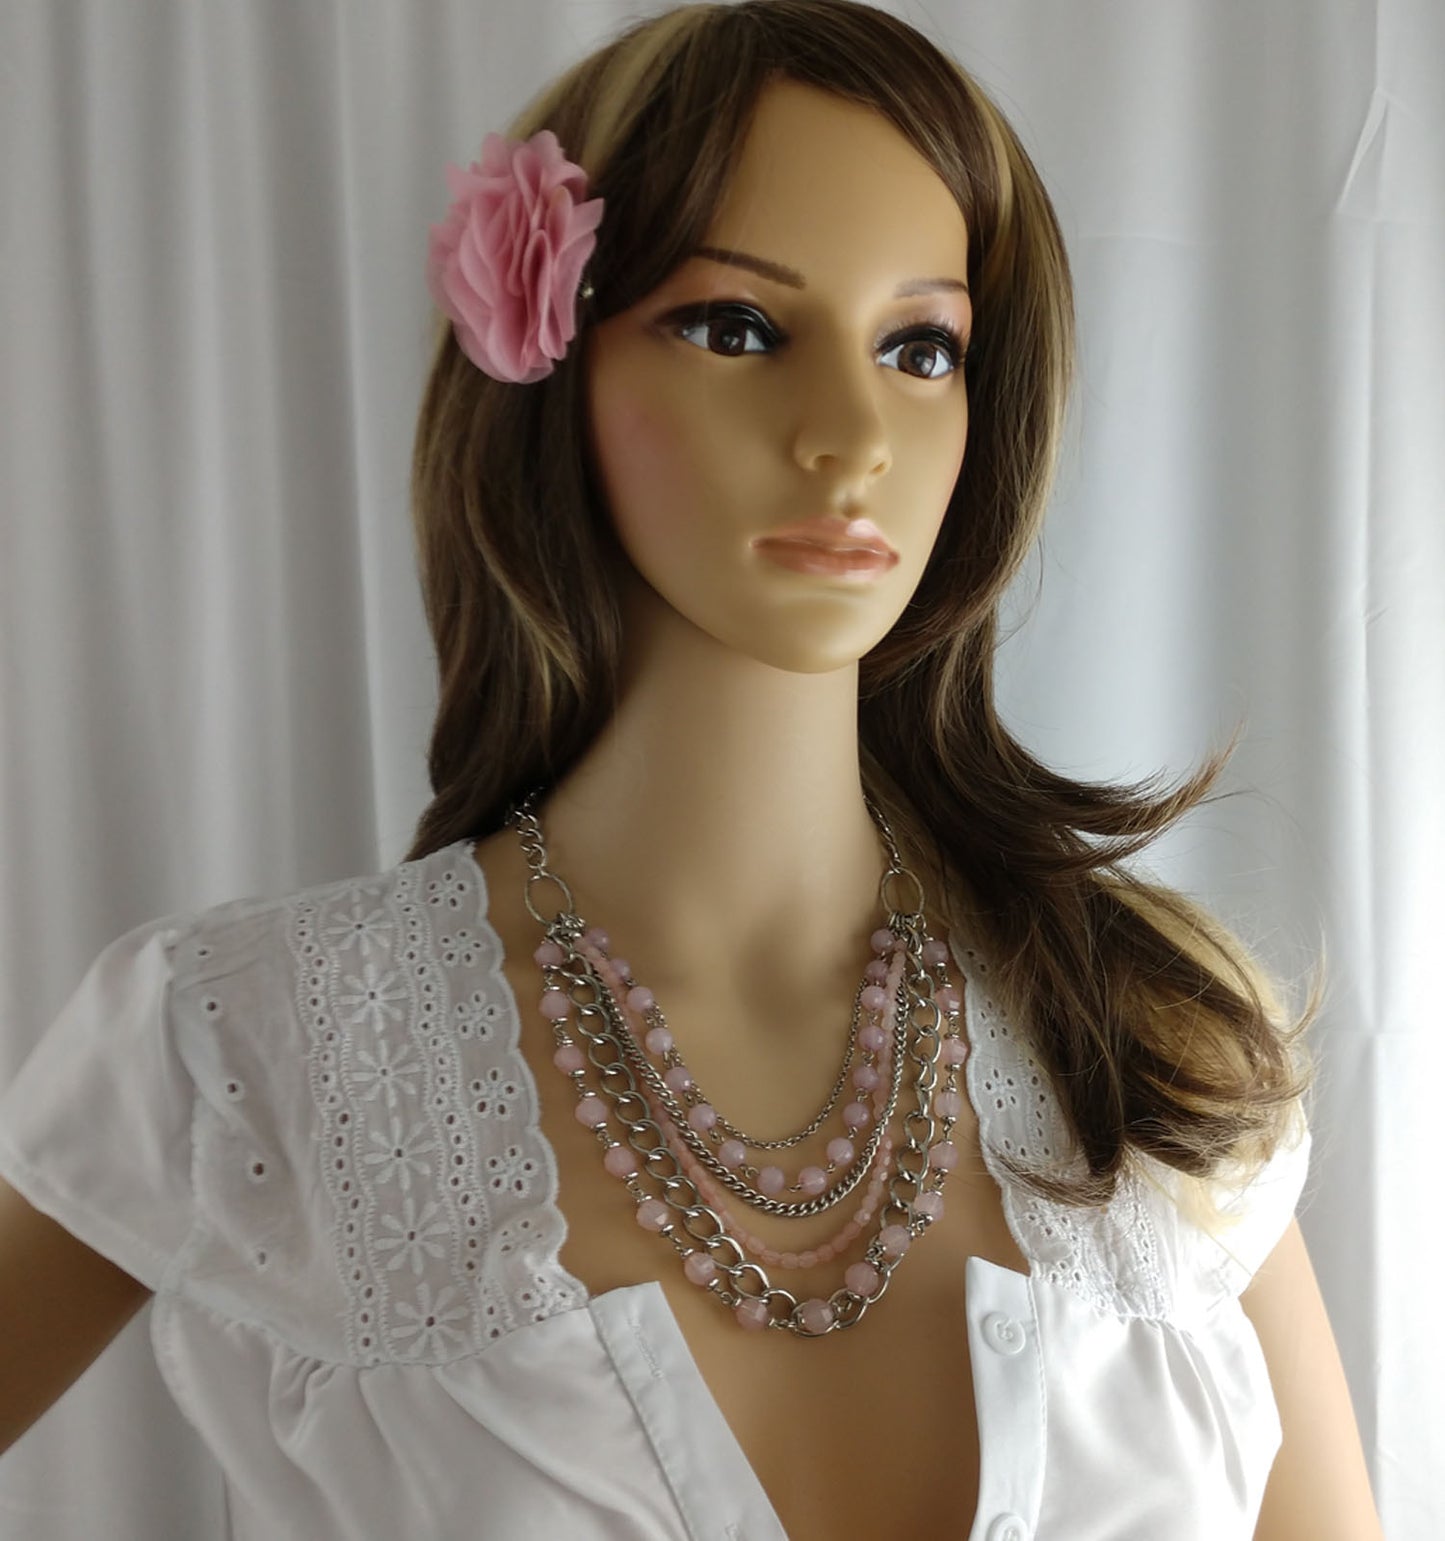 Flower Statement Necklace Beaded Necklace Light Pink Faceted Layered Chains 23"